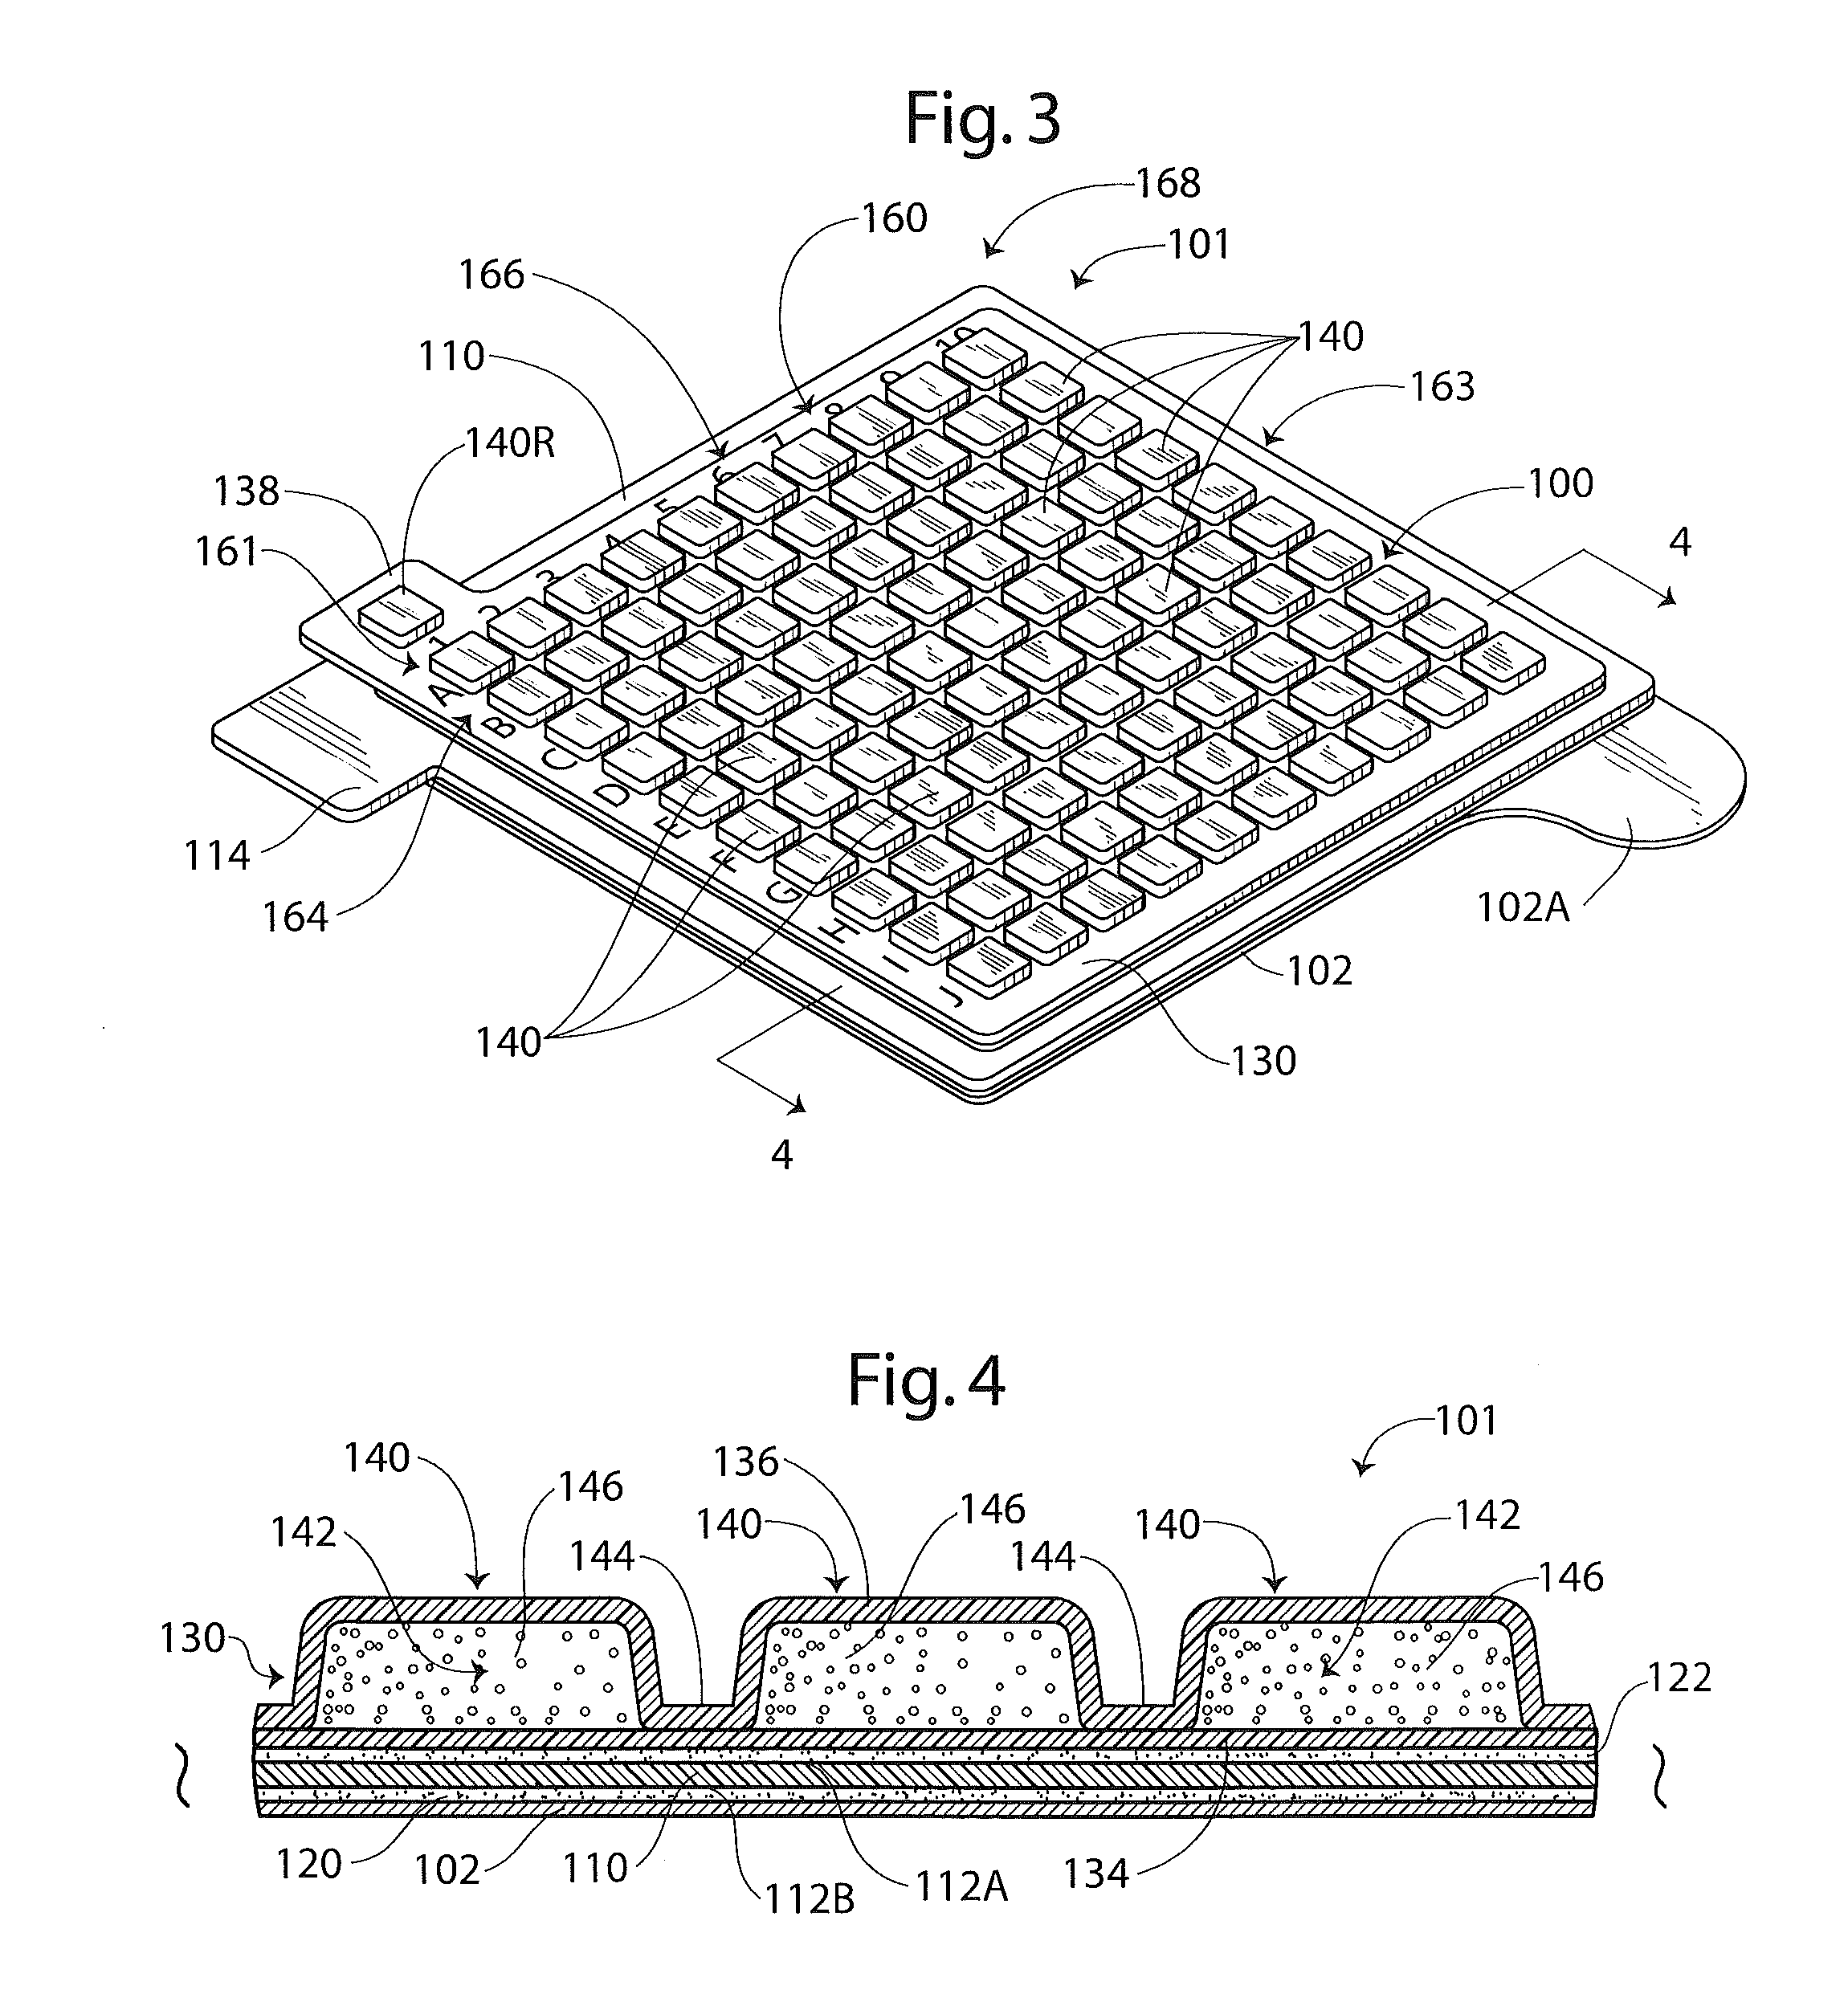 Methods for using mri-compatible patches